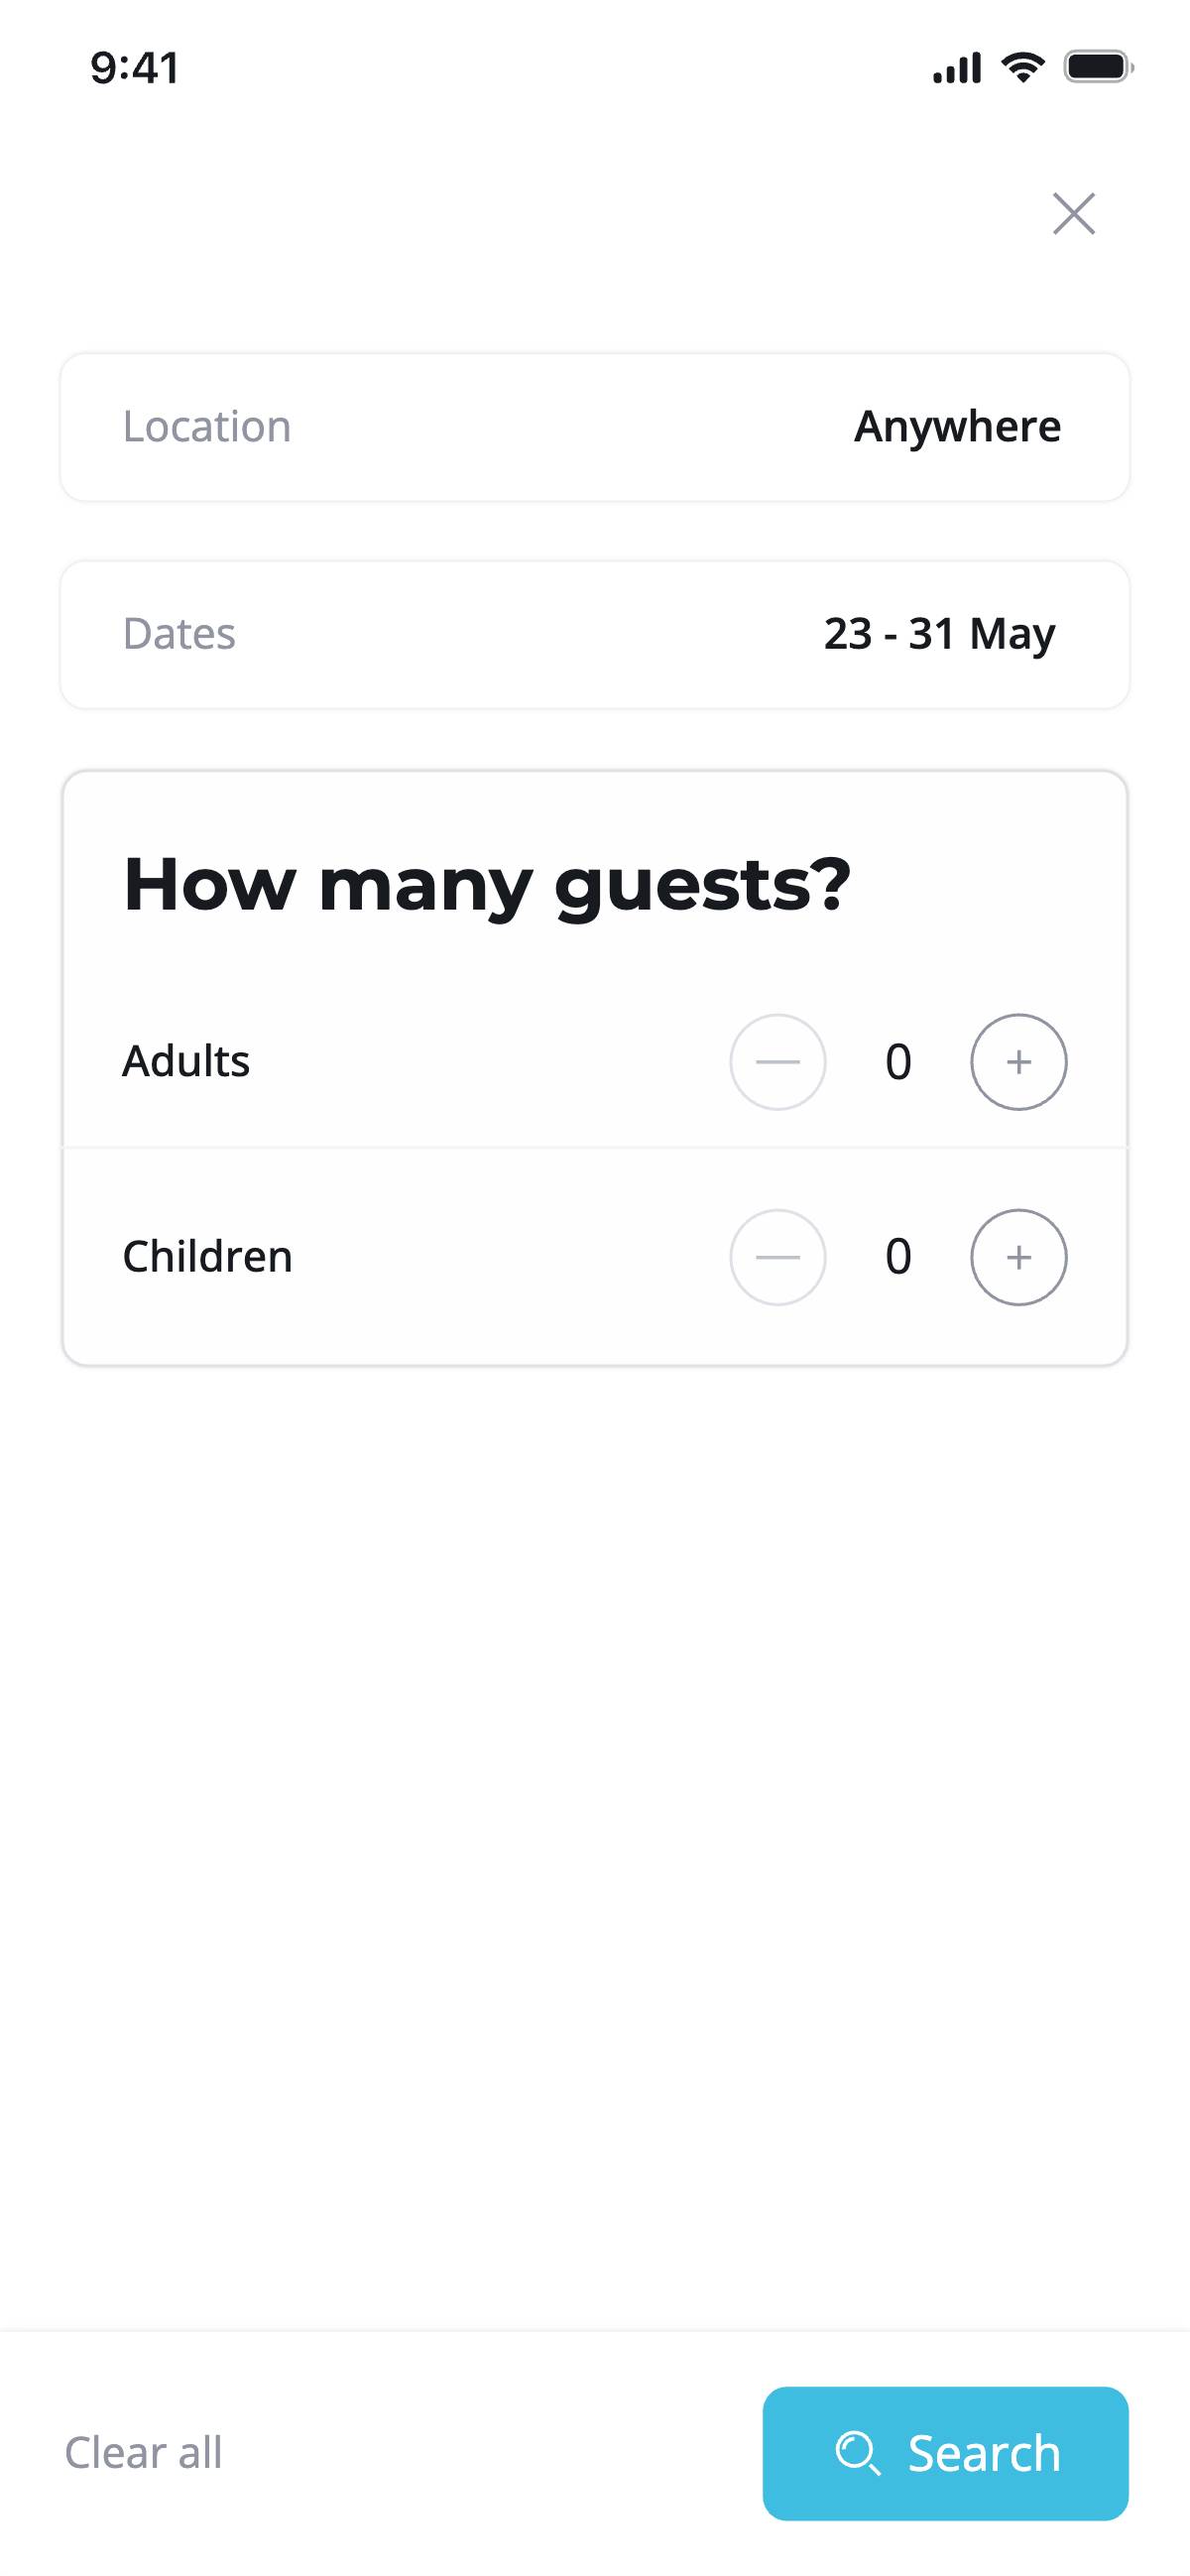 Search - Add guests